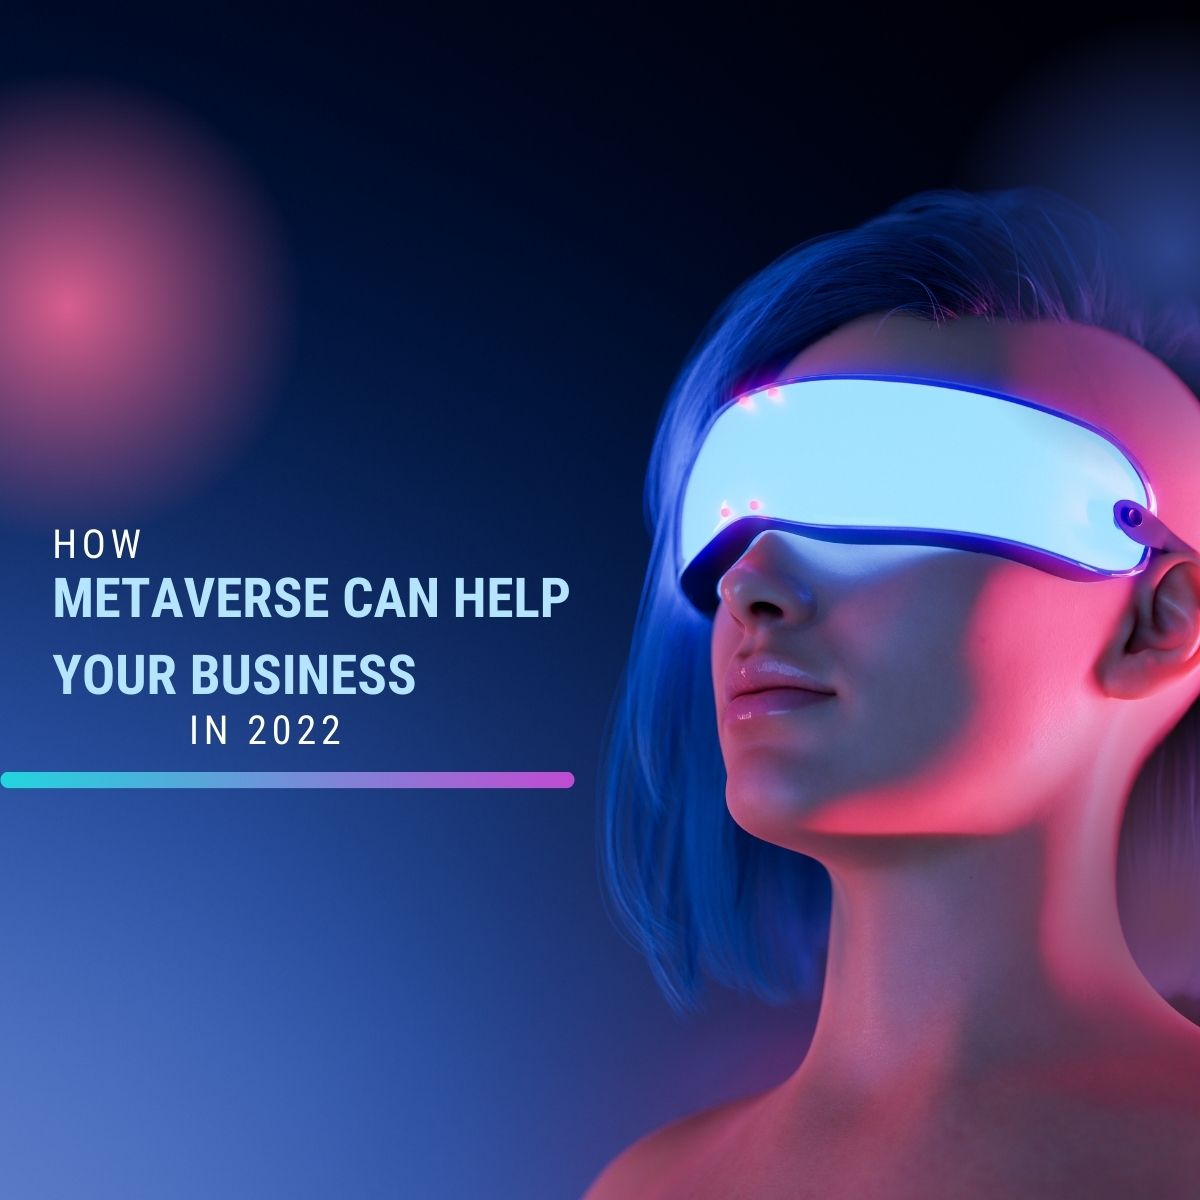 How Metaverse Can Help Your Business In 2022? Metaverse Statistics